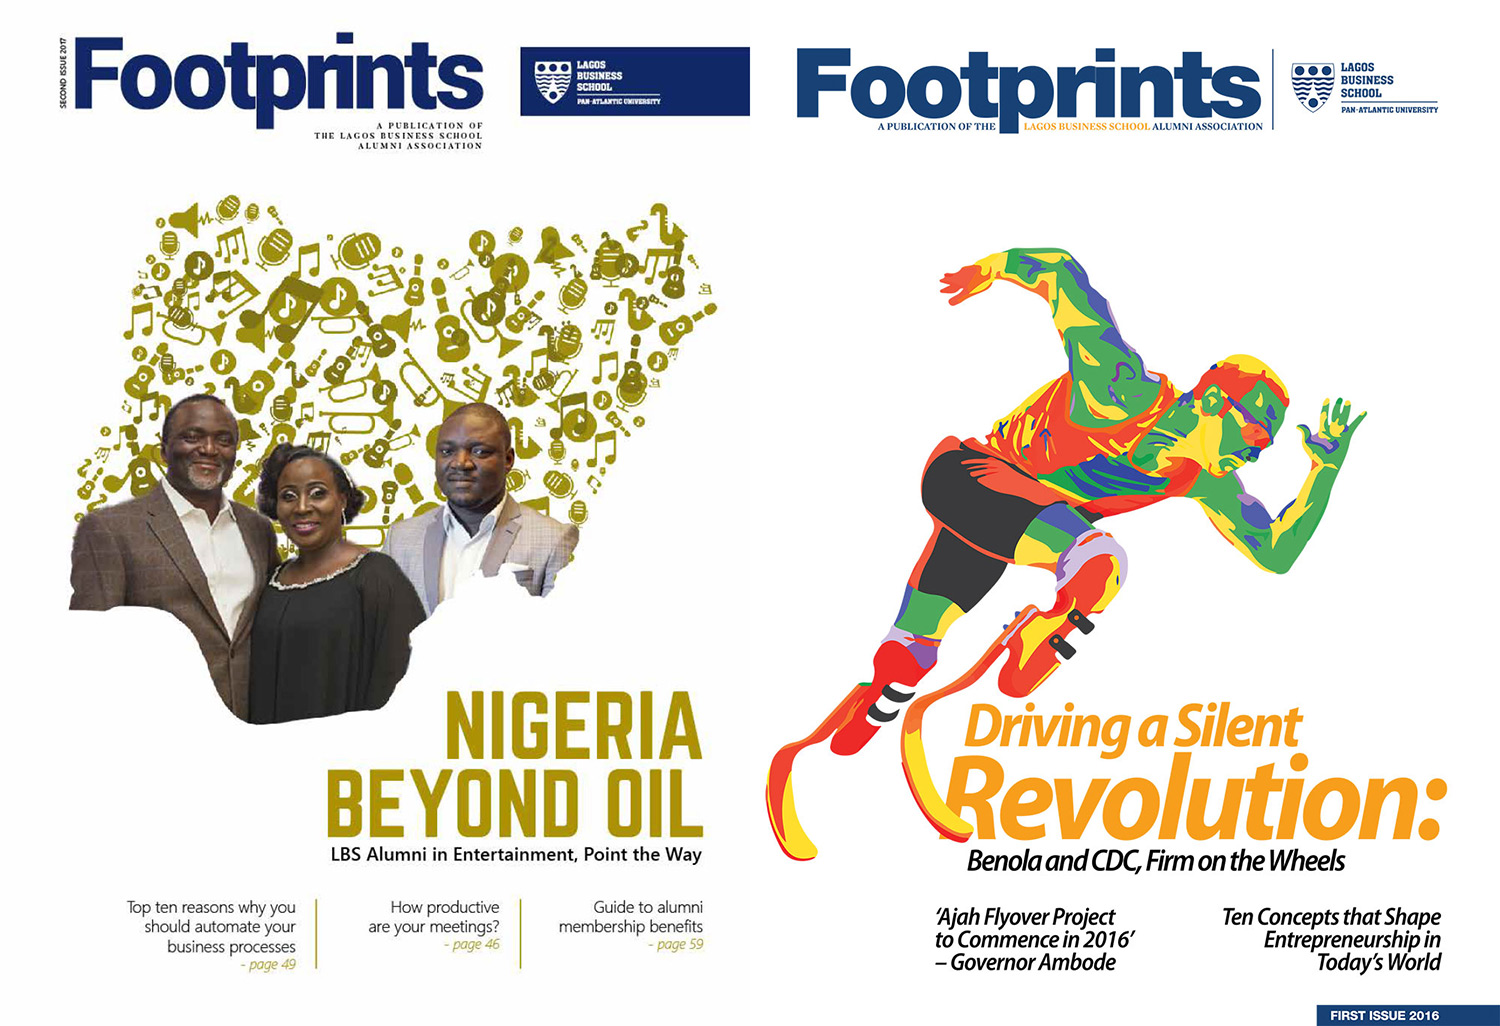 Covers of Footprints magazine show articles on Nigeria beyond oil and an article on driving a silent revolution featuring a graphic of a viable athlete running